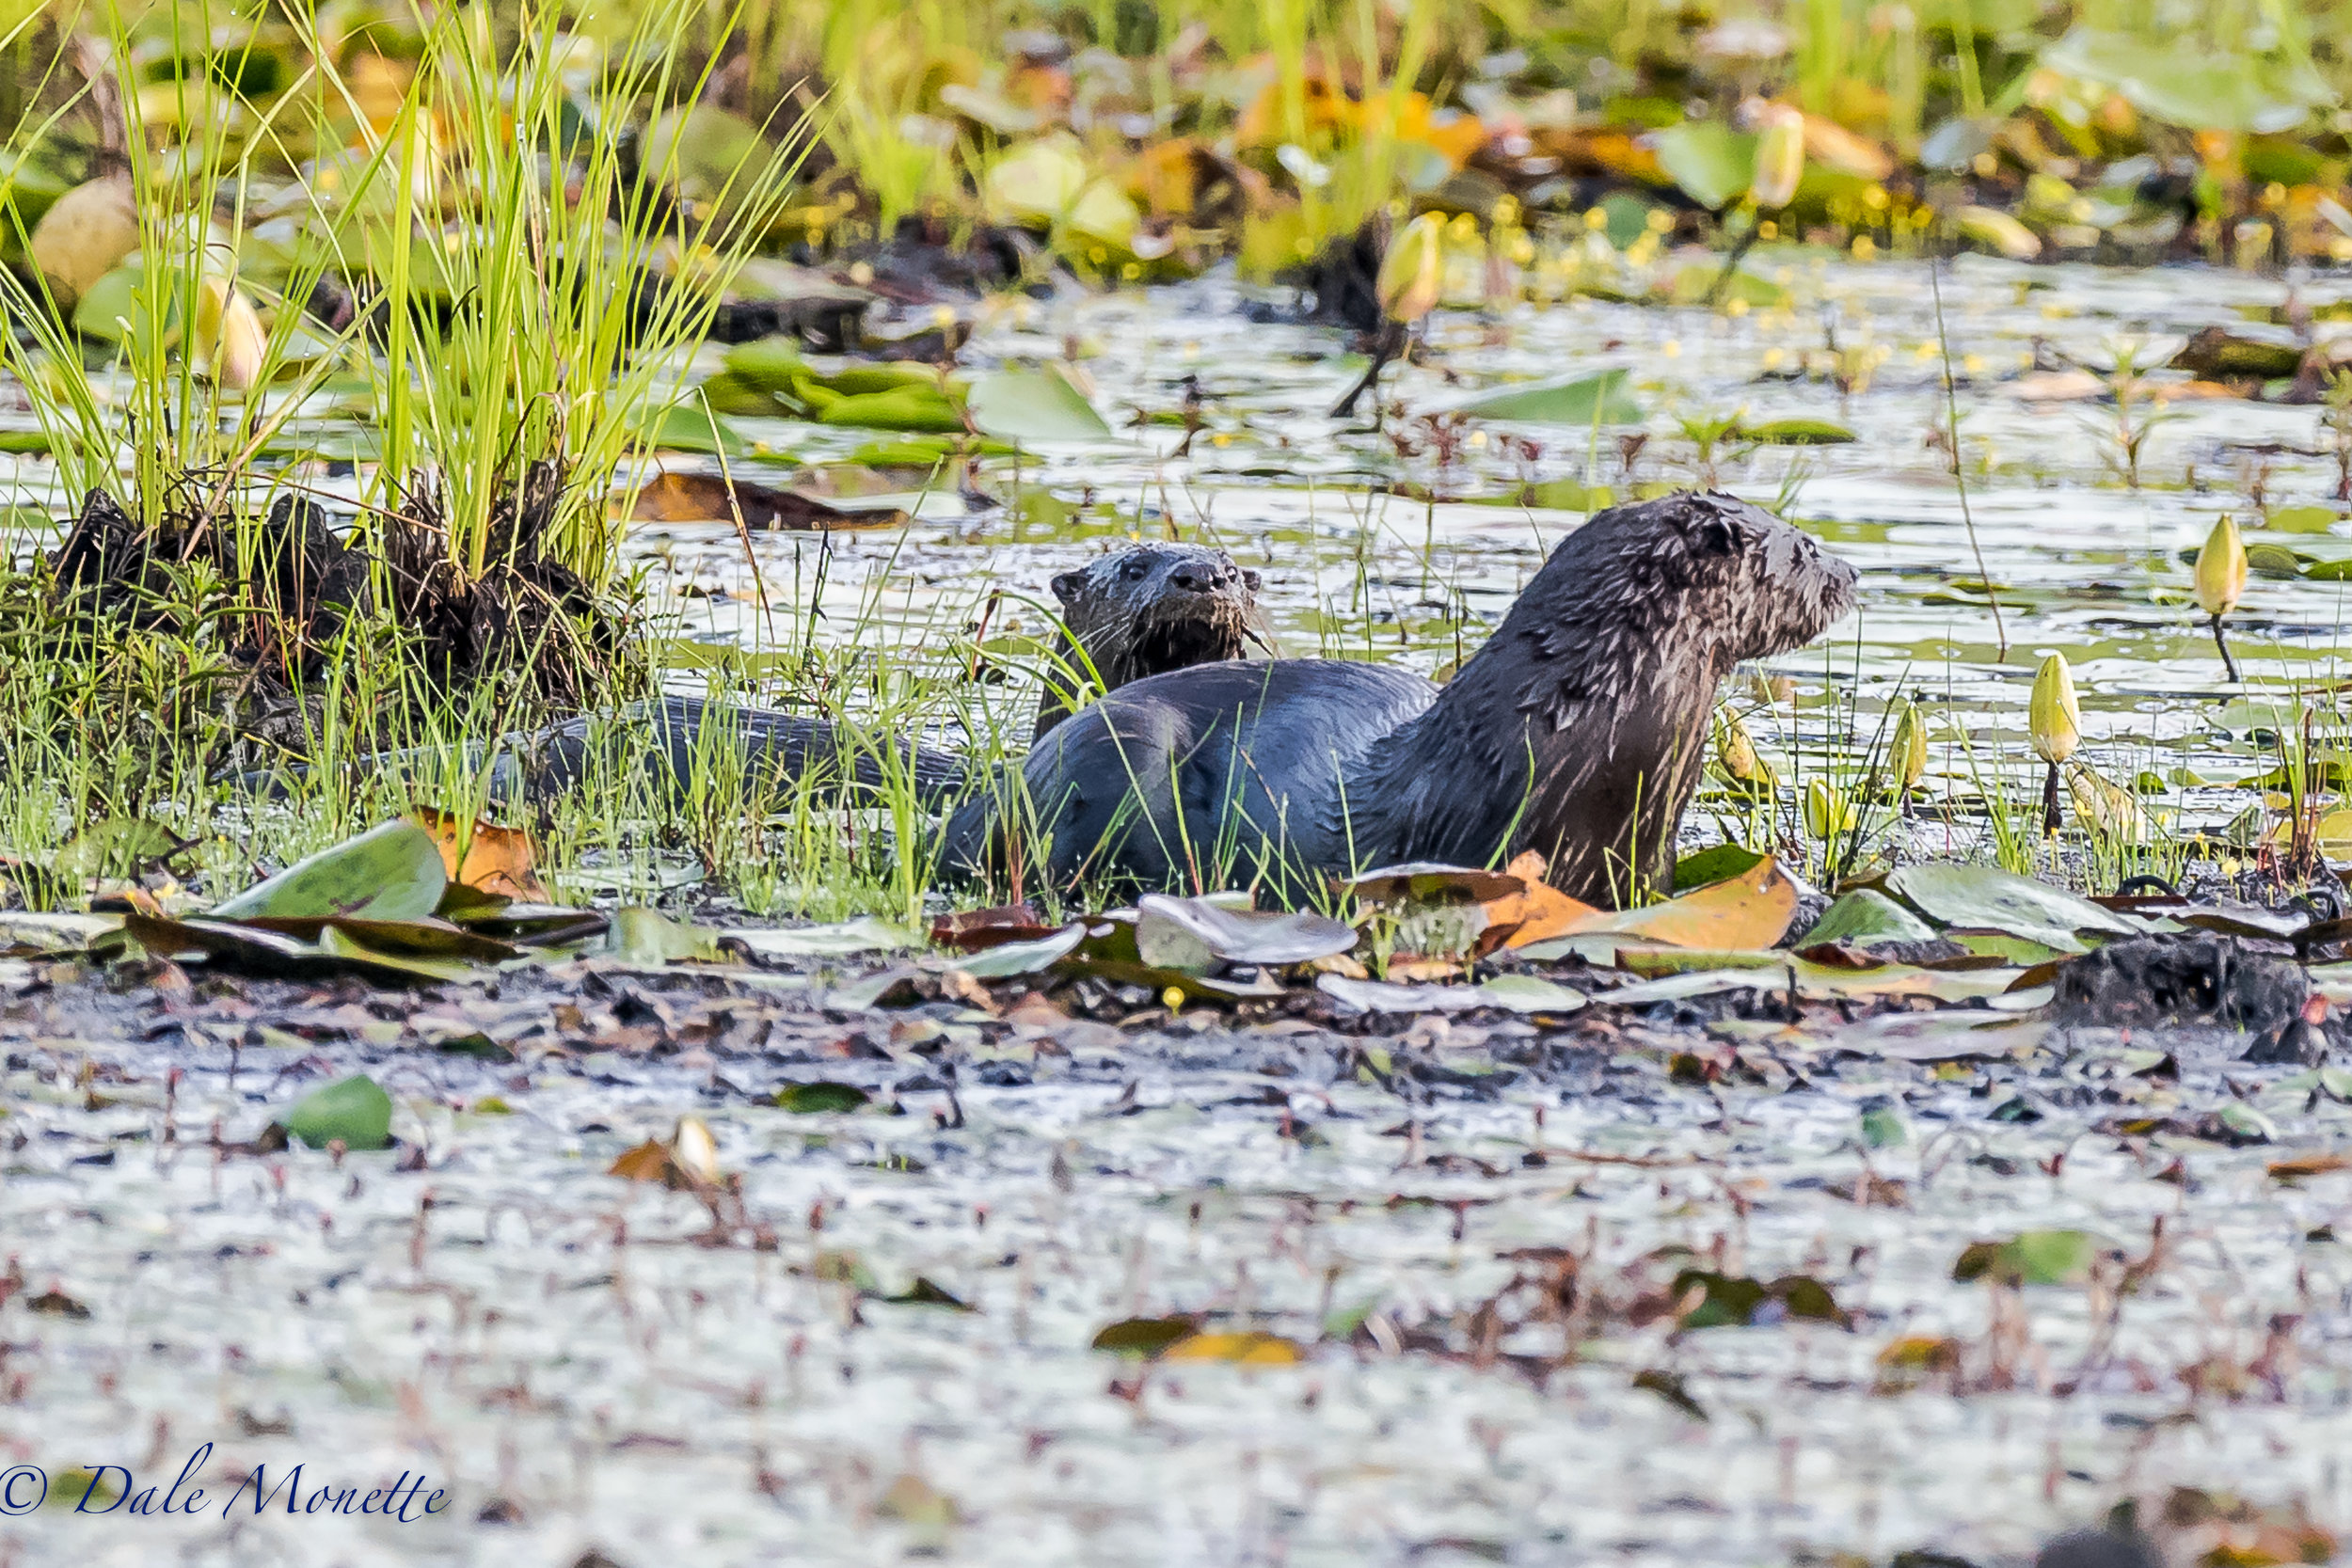   This morning I played another game of "hide and seek" with an adult otter and one of its young ones. &nbsp;The covered lots of ground in the pond. &nbsp;Finally they came in view long enough for a couple of shots. You can see the young one peeking 